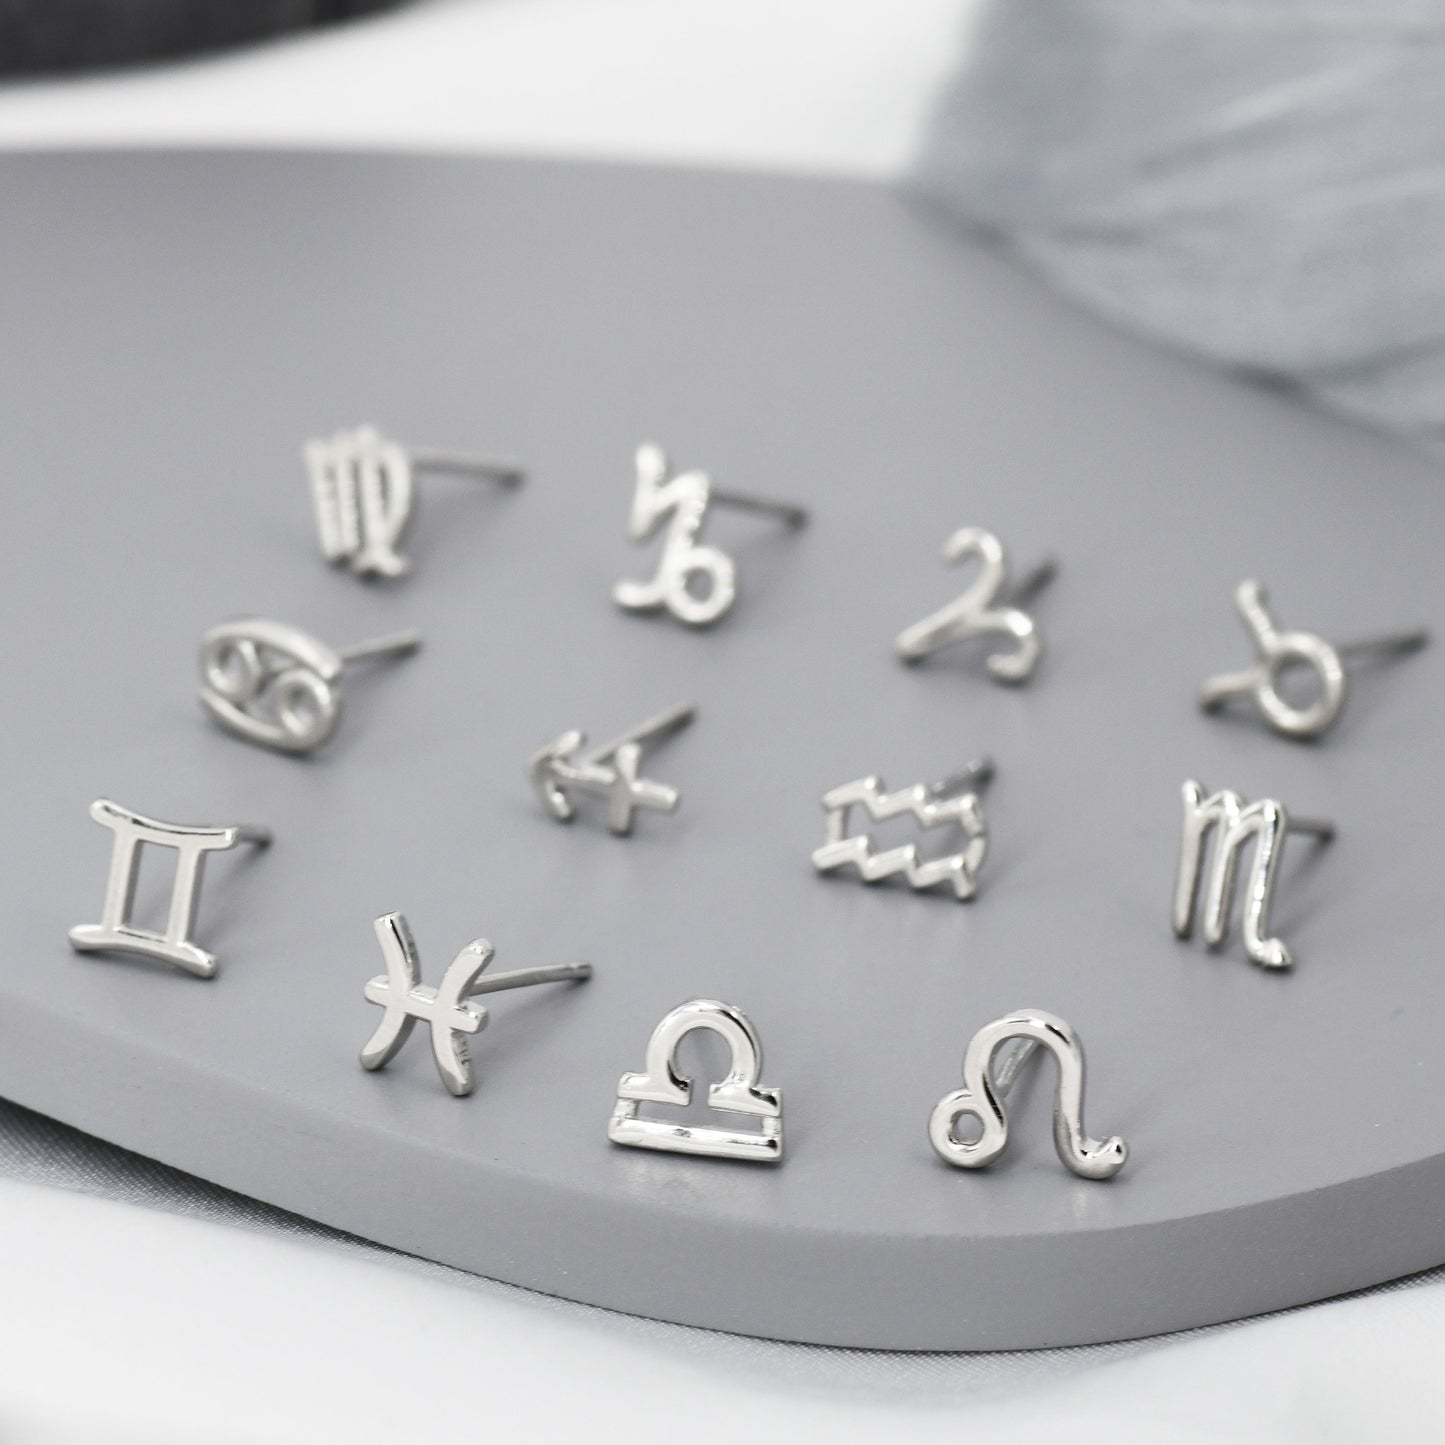 Pair of Zodiac Earring in Sterling Silver, Silver or Gold, Horoscope Stud Earrings . Fun and Quirky Design